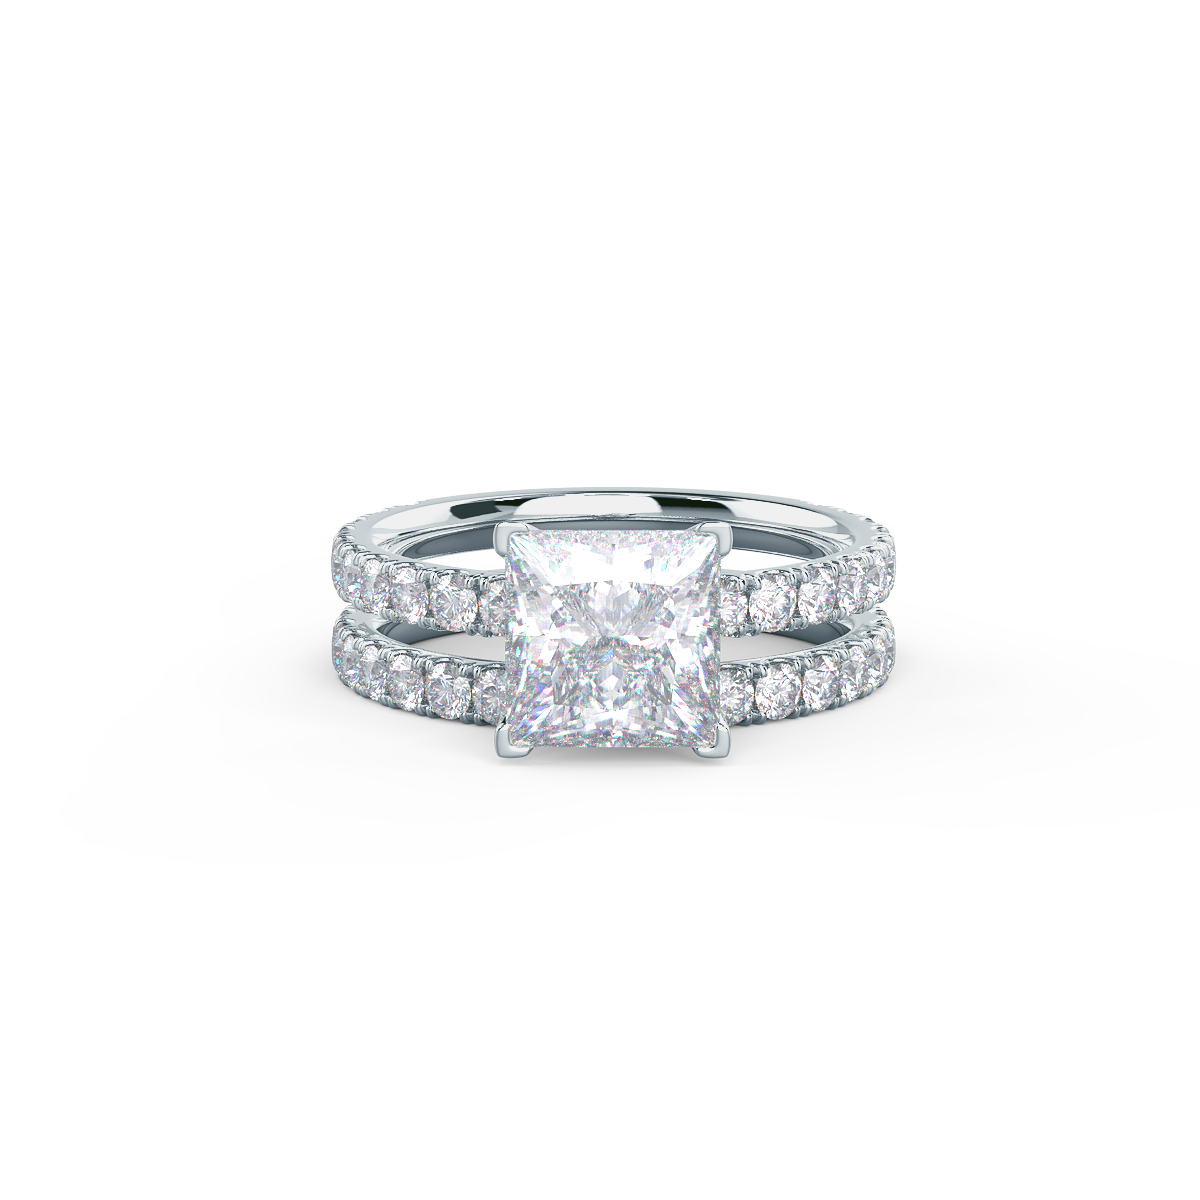   This setting pairs with a wide variety of wedding band styles.     View Wedding Band Details   